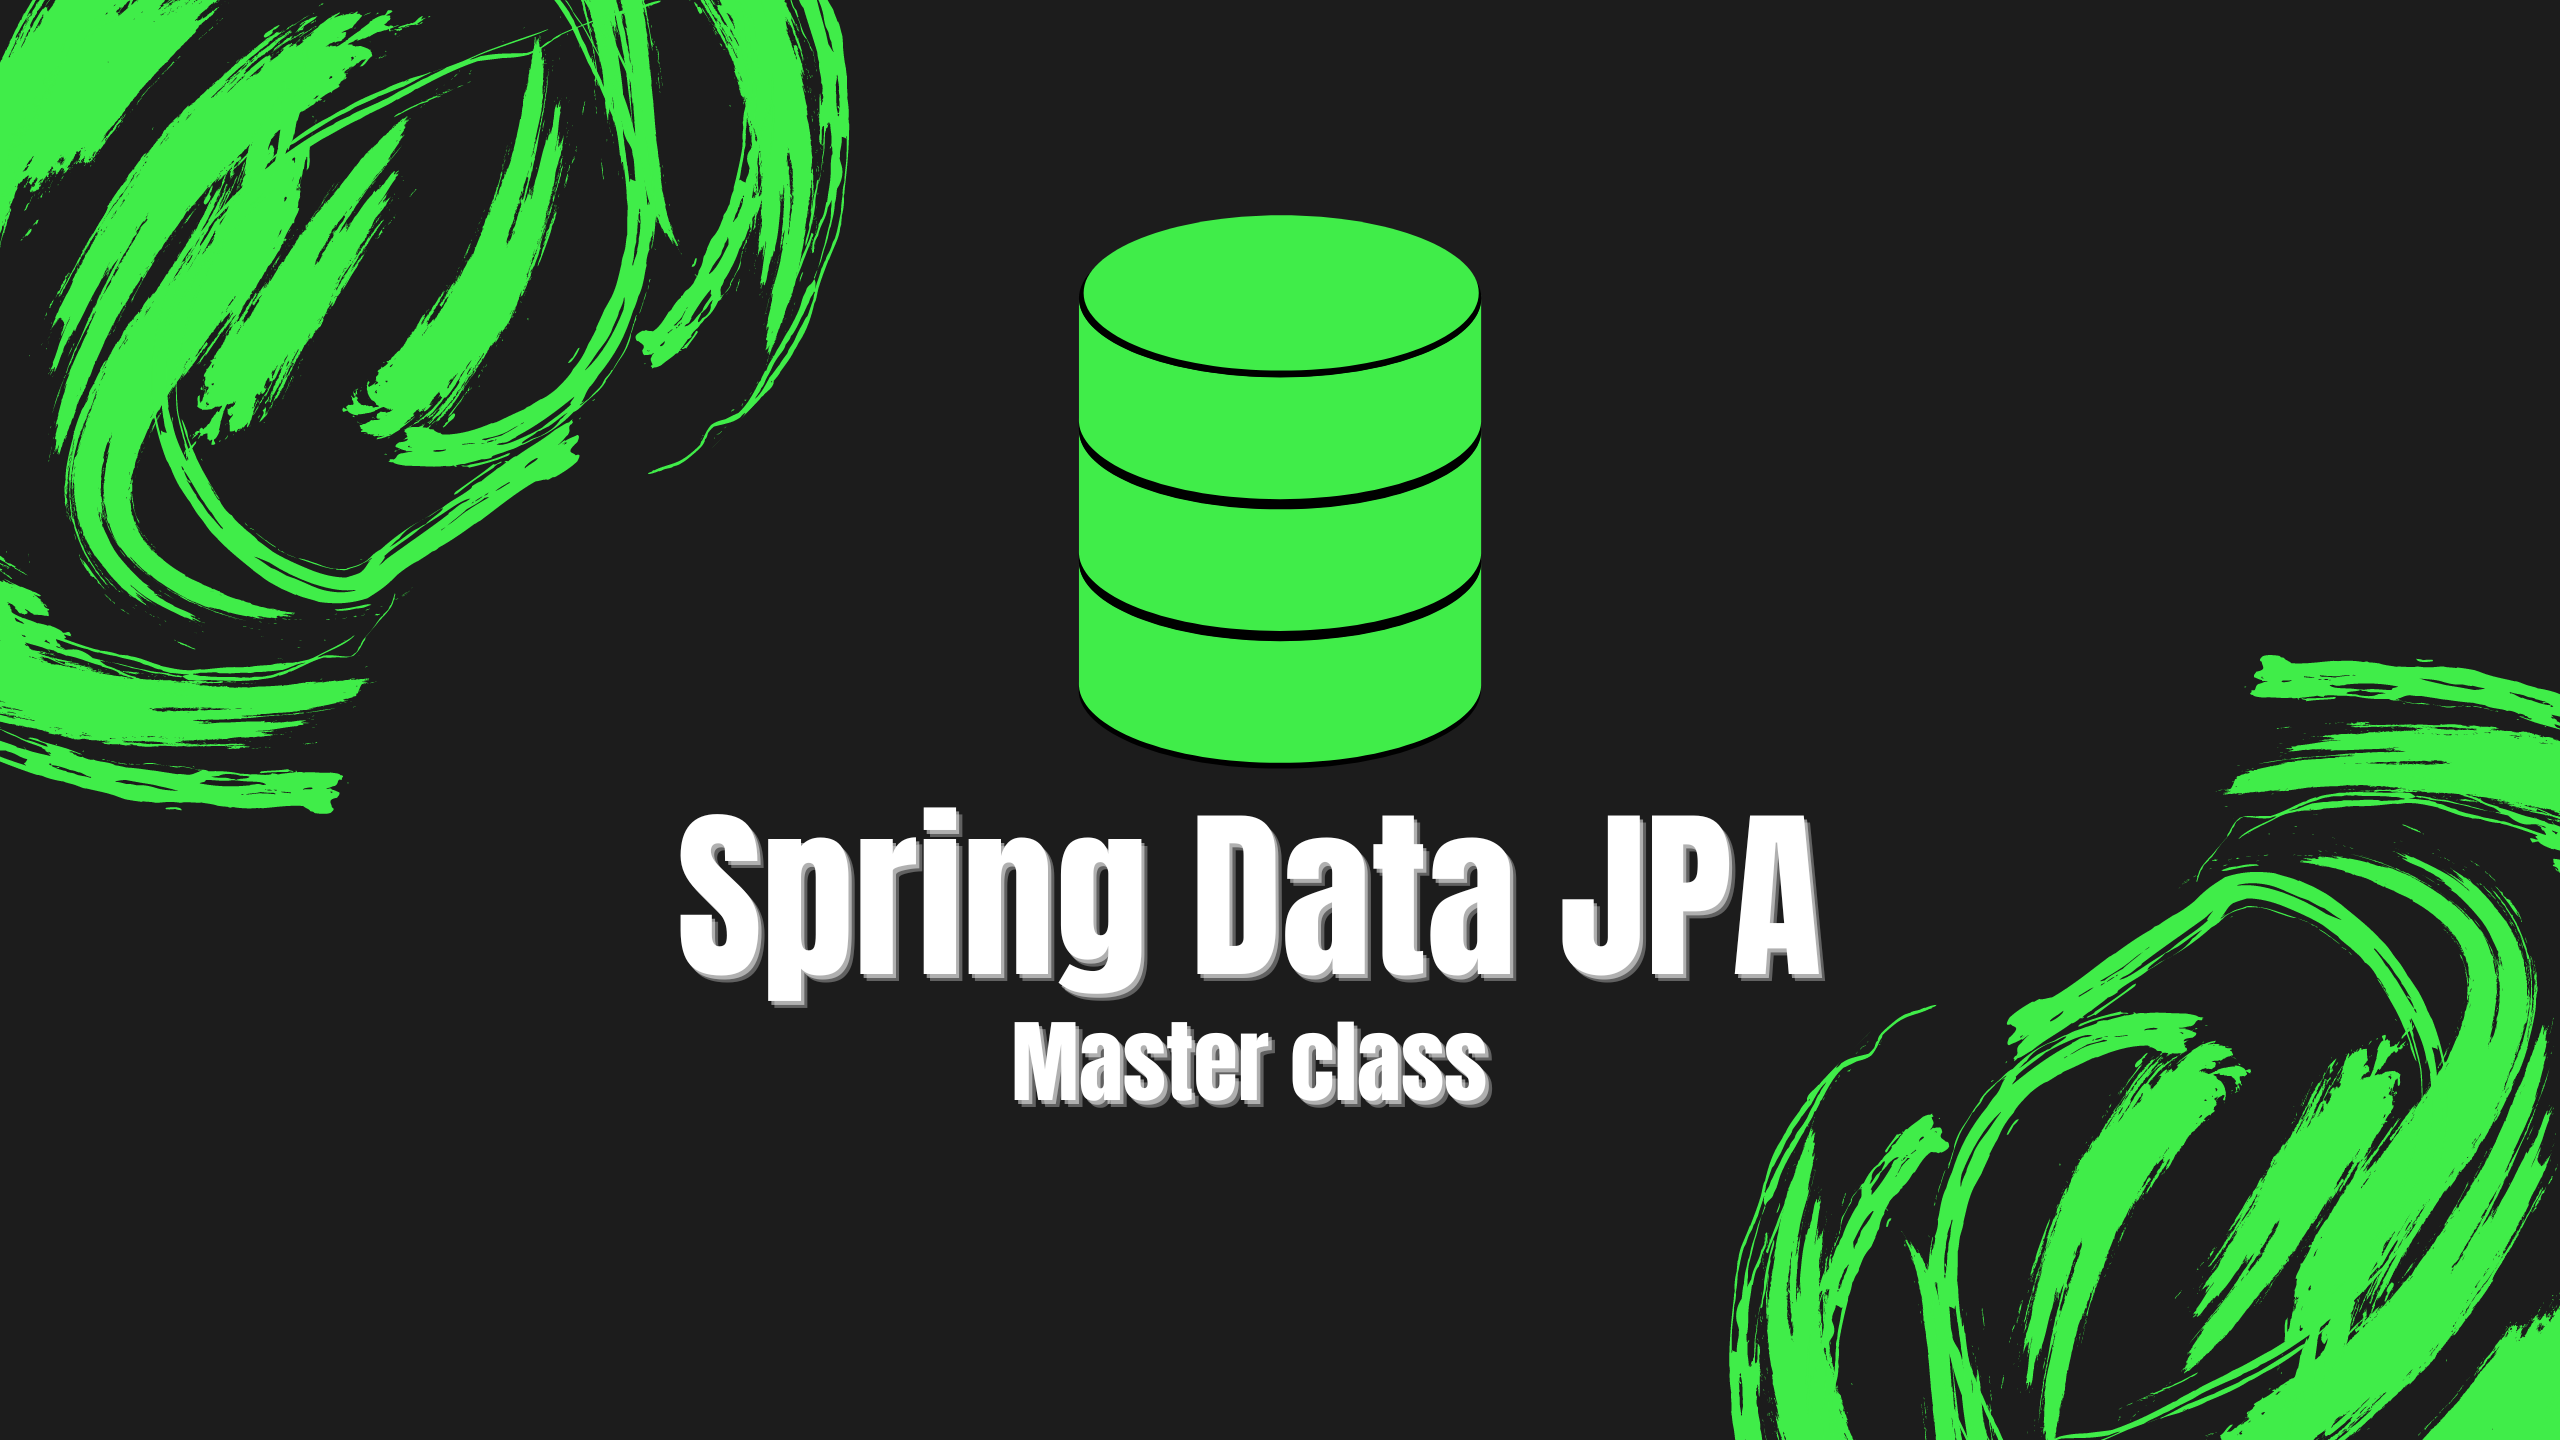 Composite Repositories - Extend your Spring Data JPA Repository